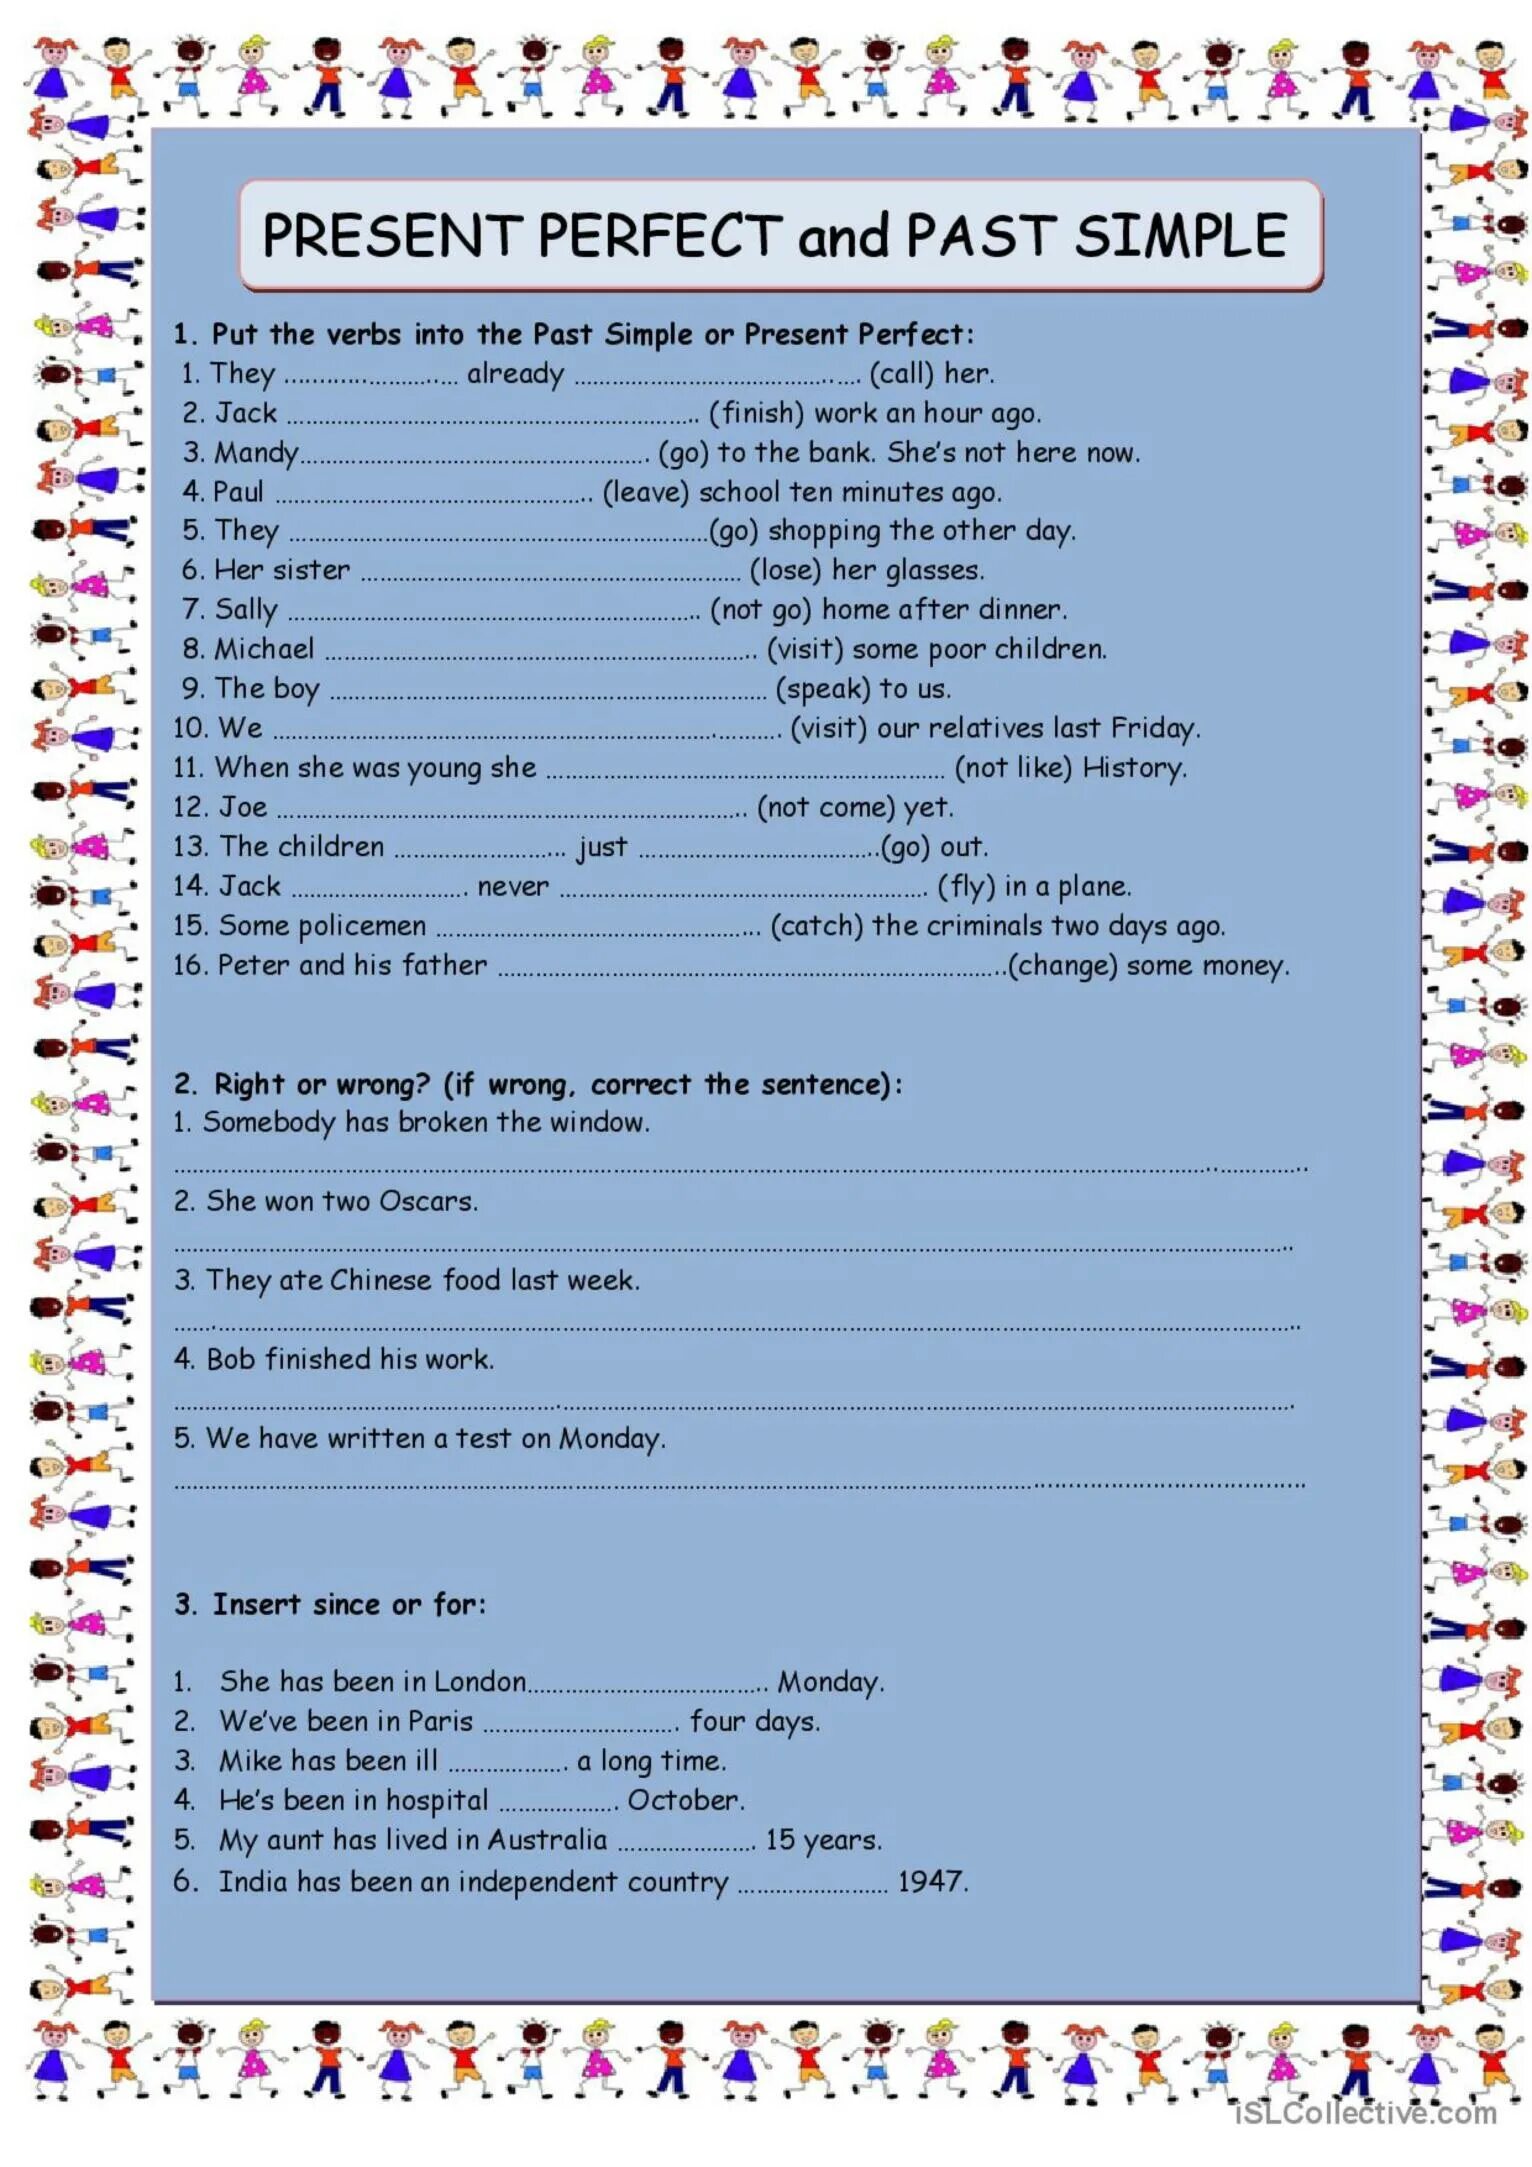 Past simple past perfect worksheets pdf. Present perfect past simple exercises Elementary. Exercises for present perfect and past simple. Past simple present perfect вопросы. Present perfect past simple Worksheets.